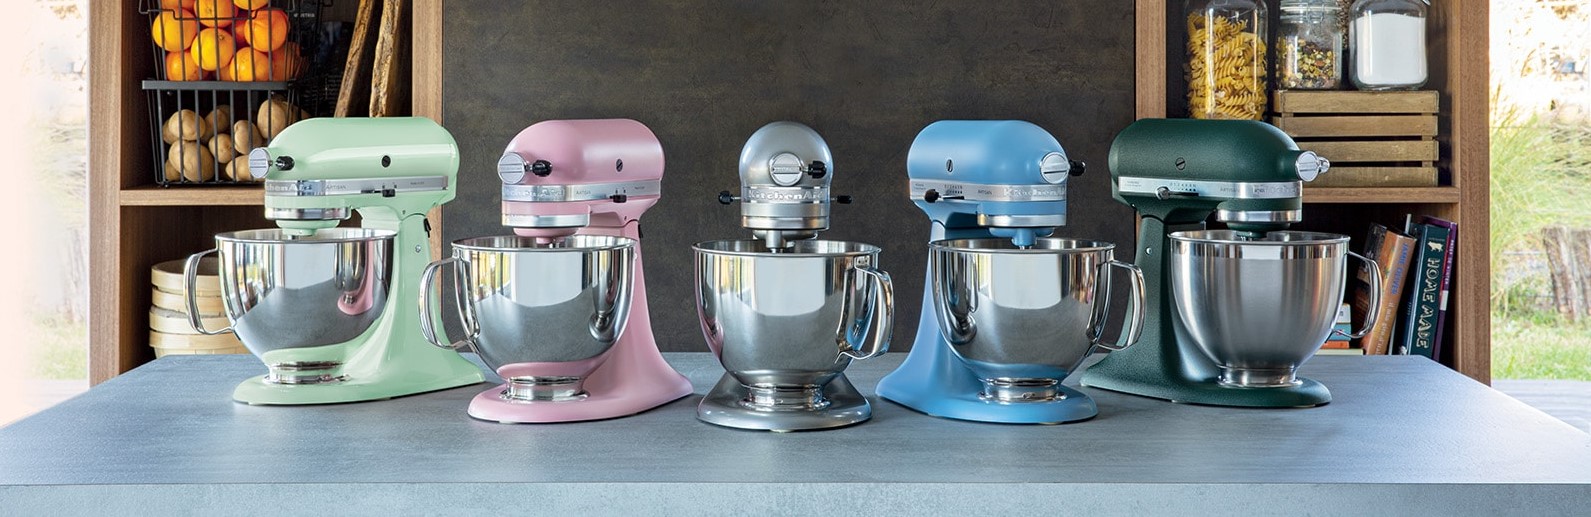 iconic-design-colorful-mixers